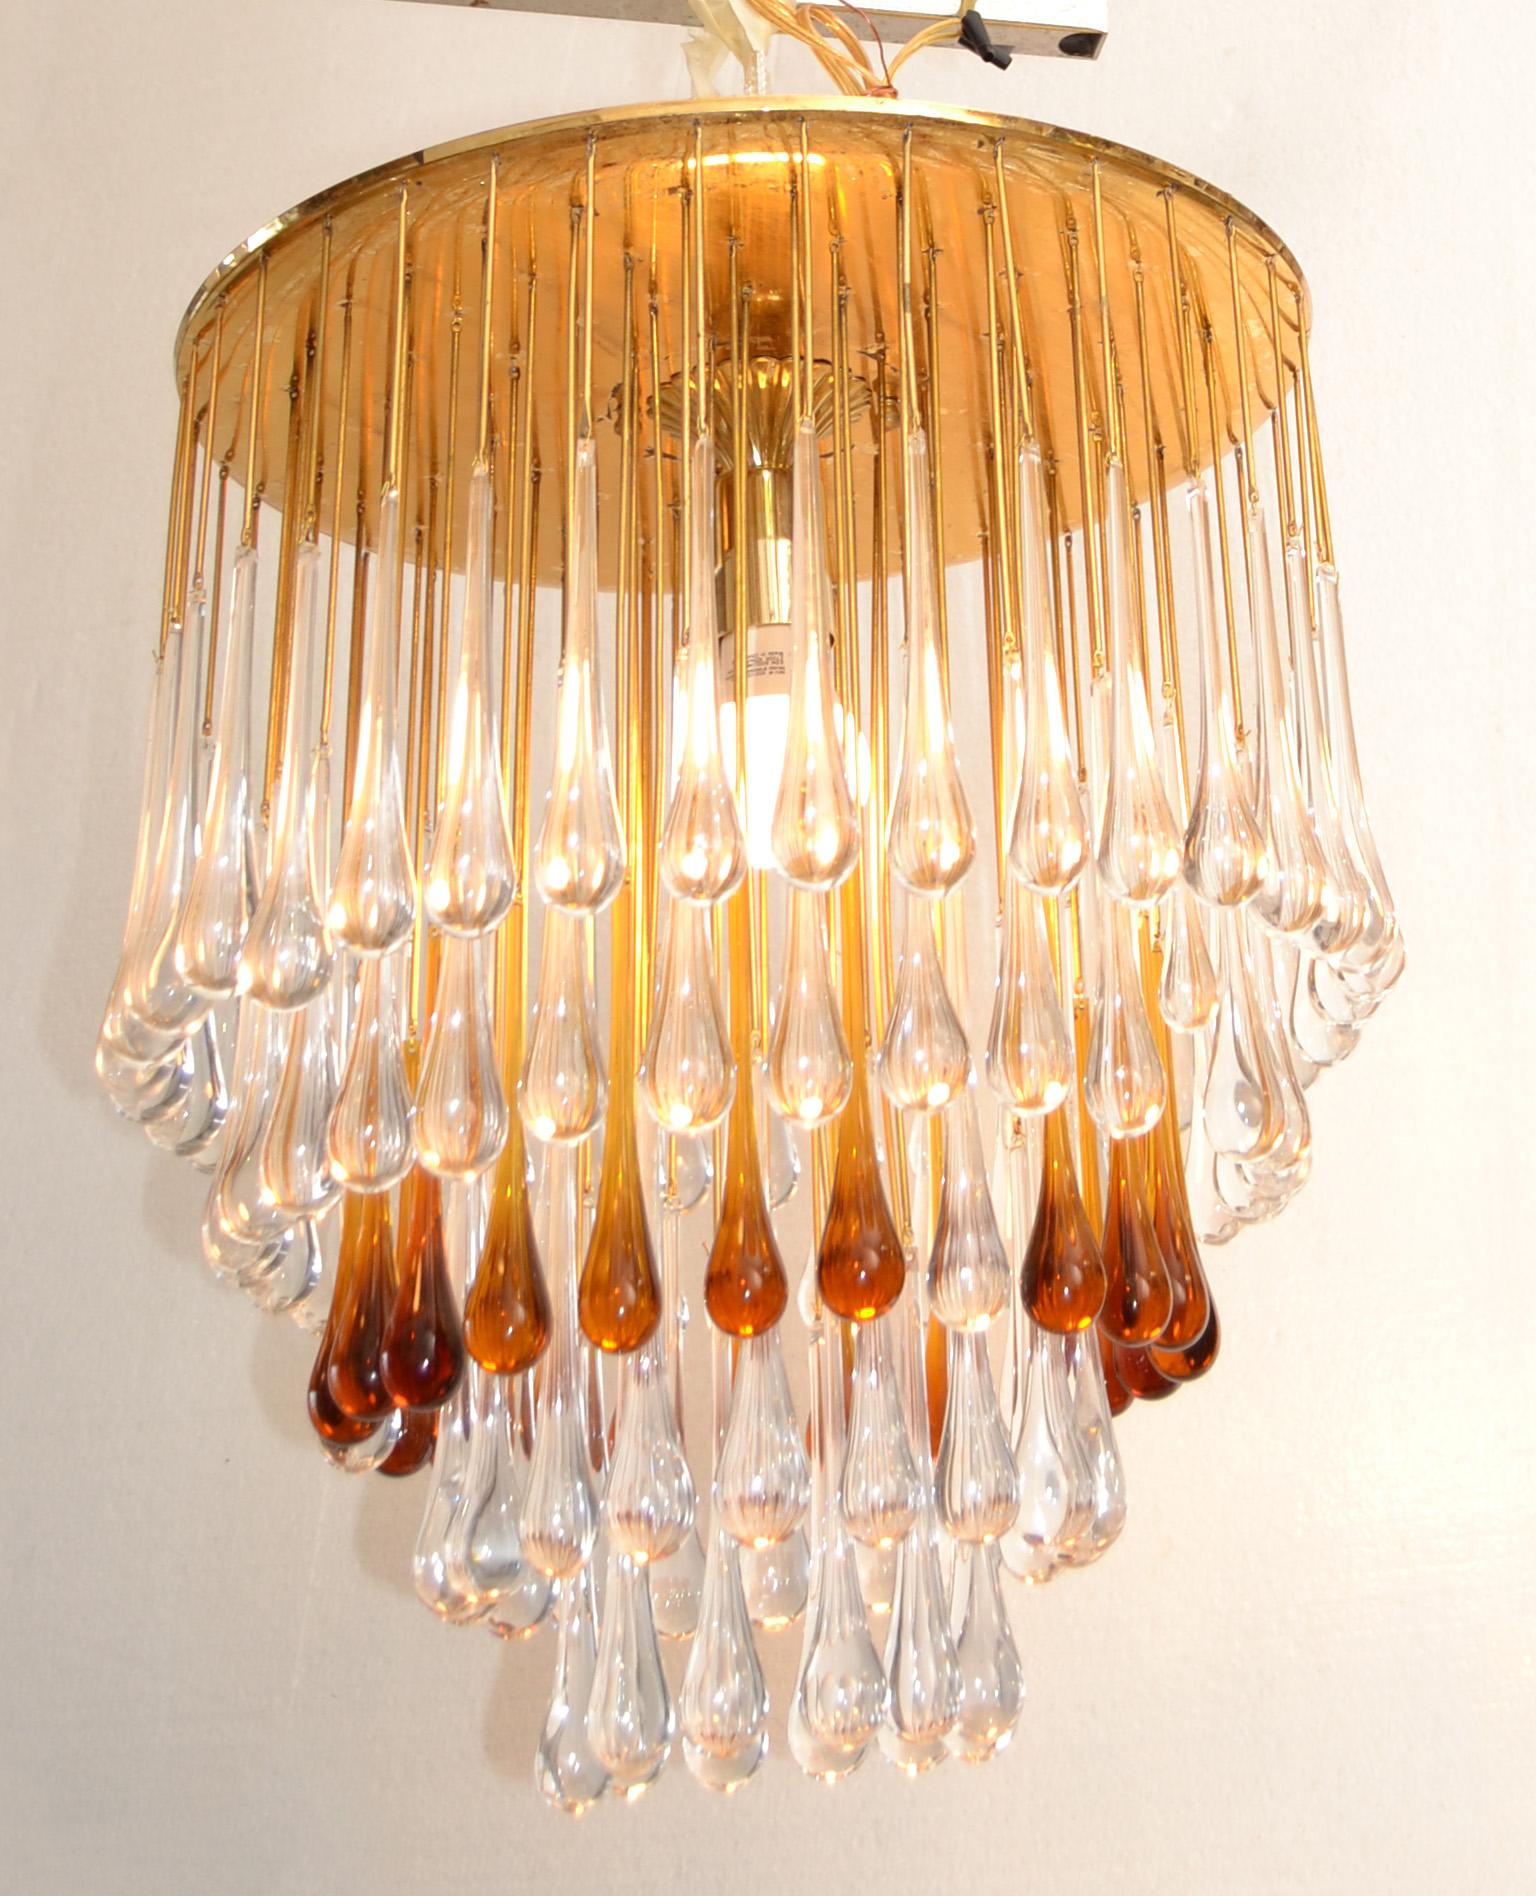 Hand-Crafted Art Deco French Gold Leaf Crystal Tear Drop Chandelier in Amber and Clear 1940 For Sale